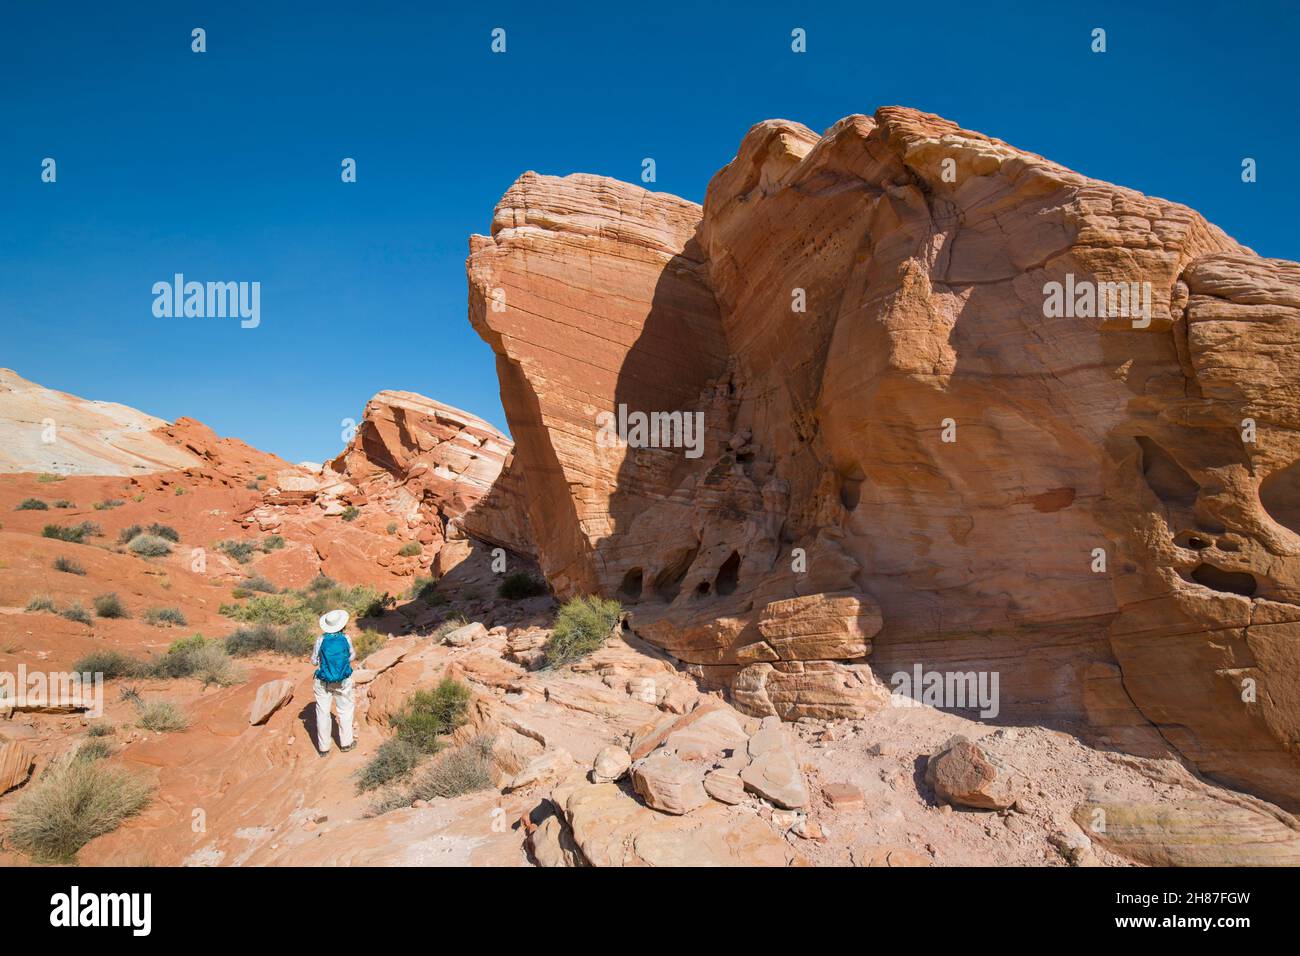 Valley of Fire State Park, Nevada, USA. Hiker on the Fire Wave Trail looking up in awe at overhanging sandstone outcrop. Stock Photo